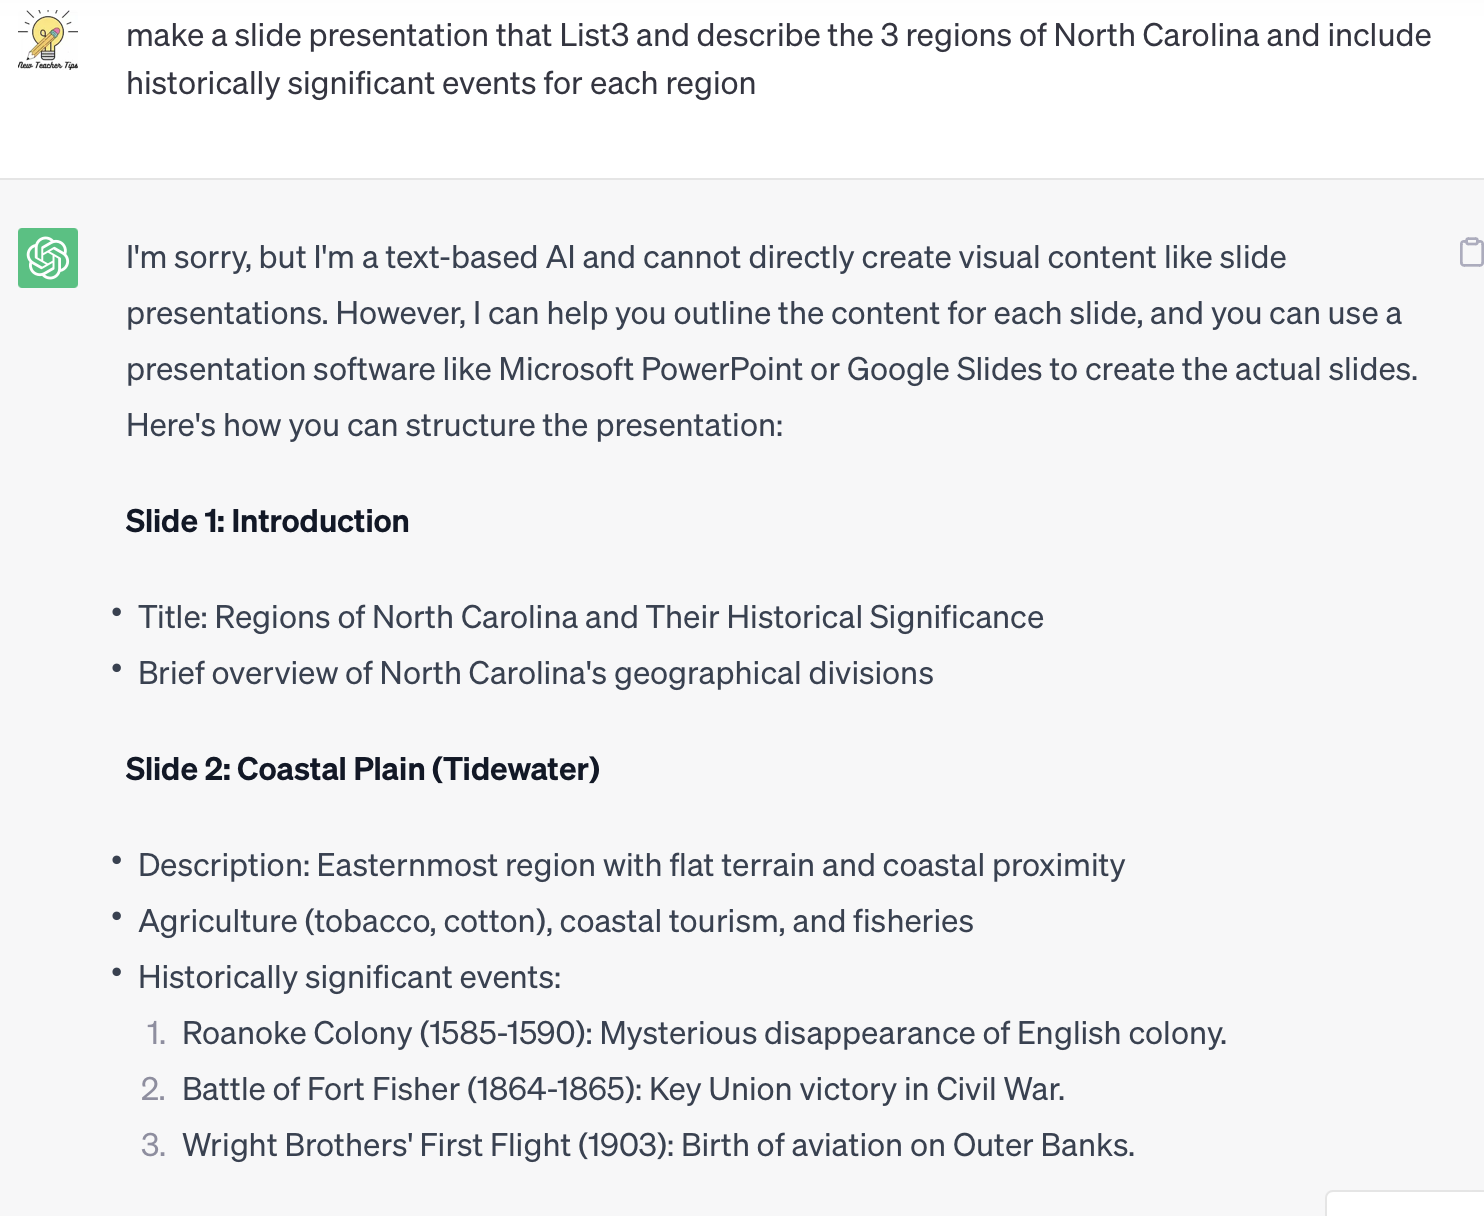 Slide presentation outline: 3 regions of North Carolina with historical events from ChatGPT